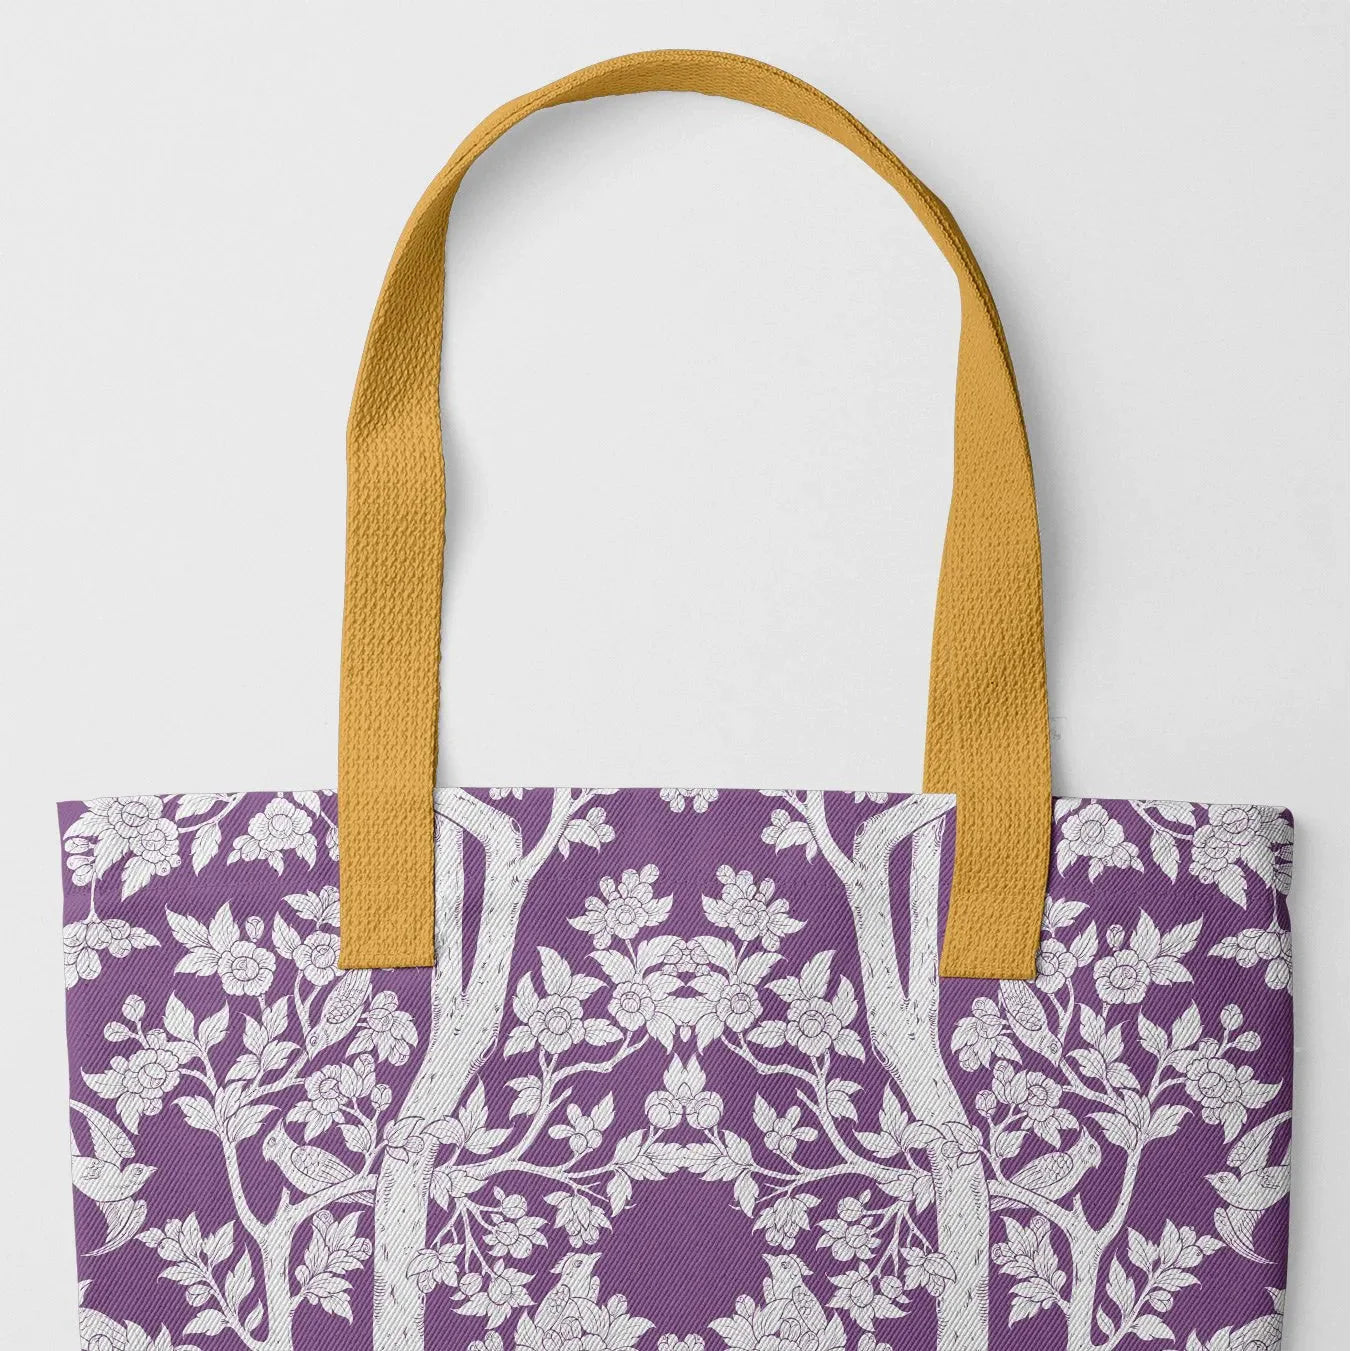 Aviary Tote - Purple Finch - Heavy Duty Reusable Grocery Bag - Yellow Handles - Shopping Totes - Aesthetic Art